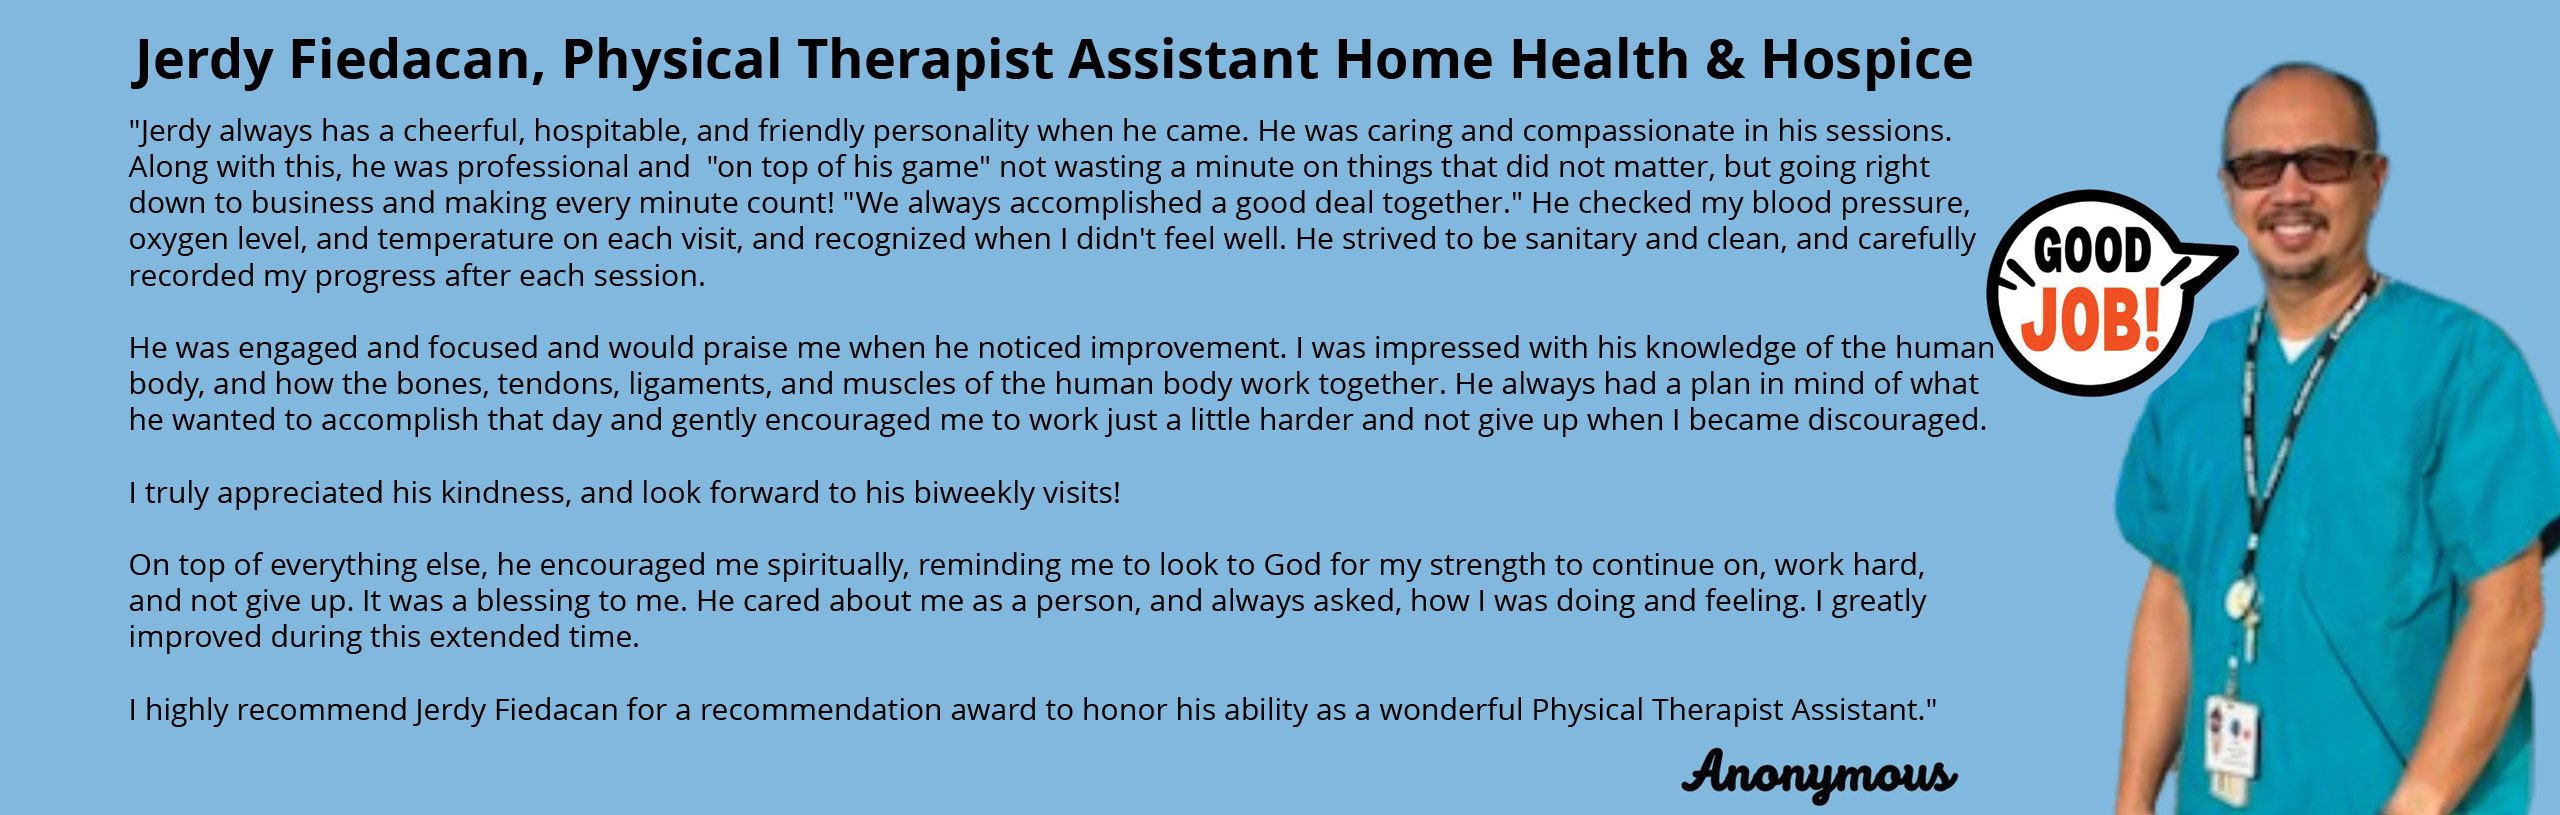 Jerdy Fiedacan, Physical Therapist Assistant Home Health & Hospice

"Jerdy always has a cheerful, hospitable, and friendly personality when he came. He was caring and compassionate in his sessions. Along with this, he was professional and "on top of his game" not wasting a minute on things that did not matter, but going right down to business and making every minute count! "We always accomplished a good deal together." He checked my blood pressure, oxygen level, and temperature on each visit, and recognized when I didn't feel well. He strived to be sanitary and clean, and carefully recorded my progress after each session.

He was engaged and focused and would praise me when he noticed improvement. I was impressed with his knowledge of the human body, and how the bones, tendons, ligaments, and muscle of the human body work together. He always had a plan in mind of what he wanted to accomplish that day and gently encouraged me to work just a little harder and not give up when I became discouraged.

I truly appreciated his kindness, and look forward to his biweekly visits!

On top of everything else, he encouraged me spiritually, reminding me to look to God for my strength to continue on, work hard, and not give up. It was a blessing to me. He cared about me as a person, and always asked, how I was doing and feeling. I greatly improved during this extended time.

I highly recommend Jerdy Fiedacan for a recommendation award to honor his ability as a wonderful Physical Therapist Assistant."

Anonymous